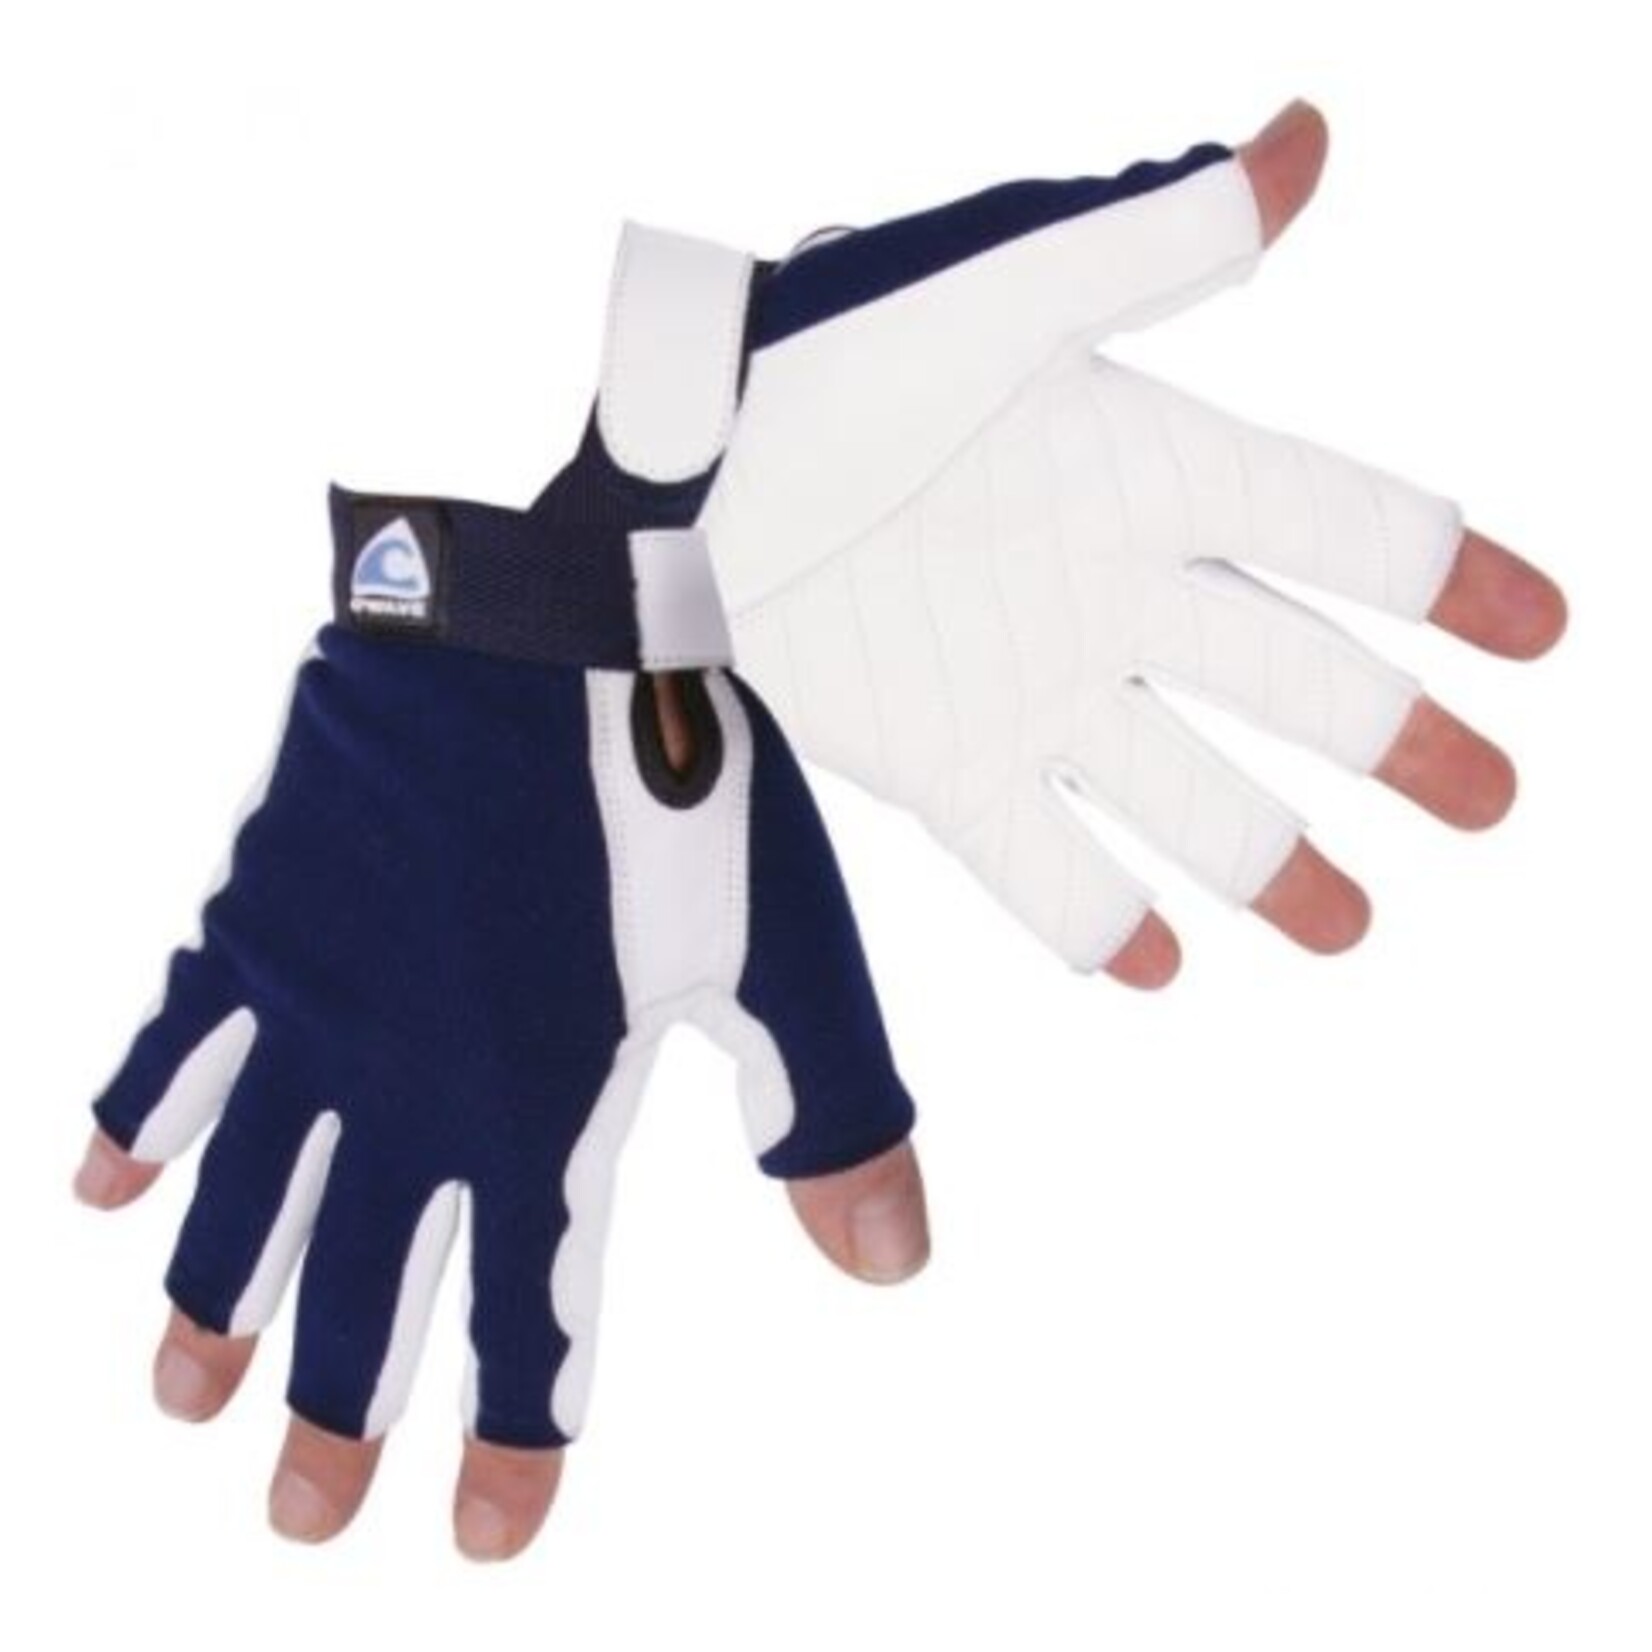 Plastimo O'wave gloves first+ 5dc l